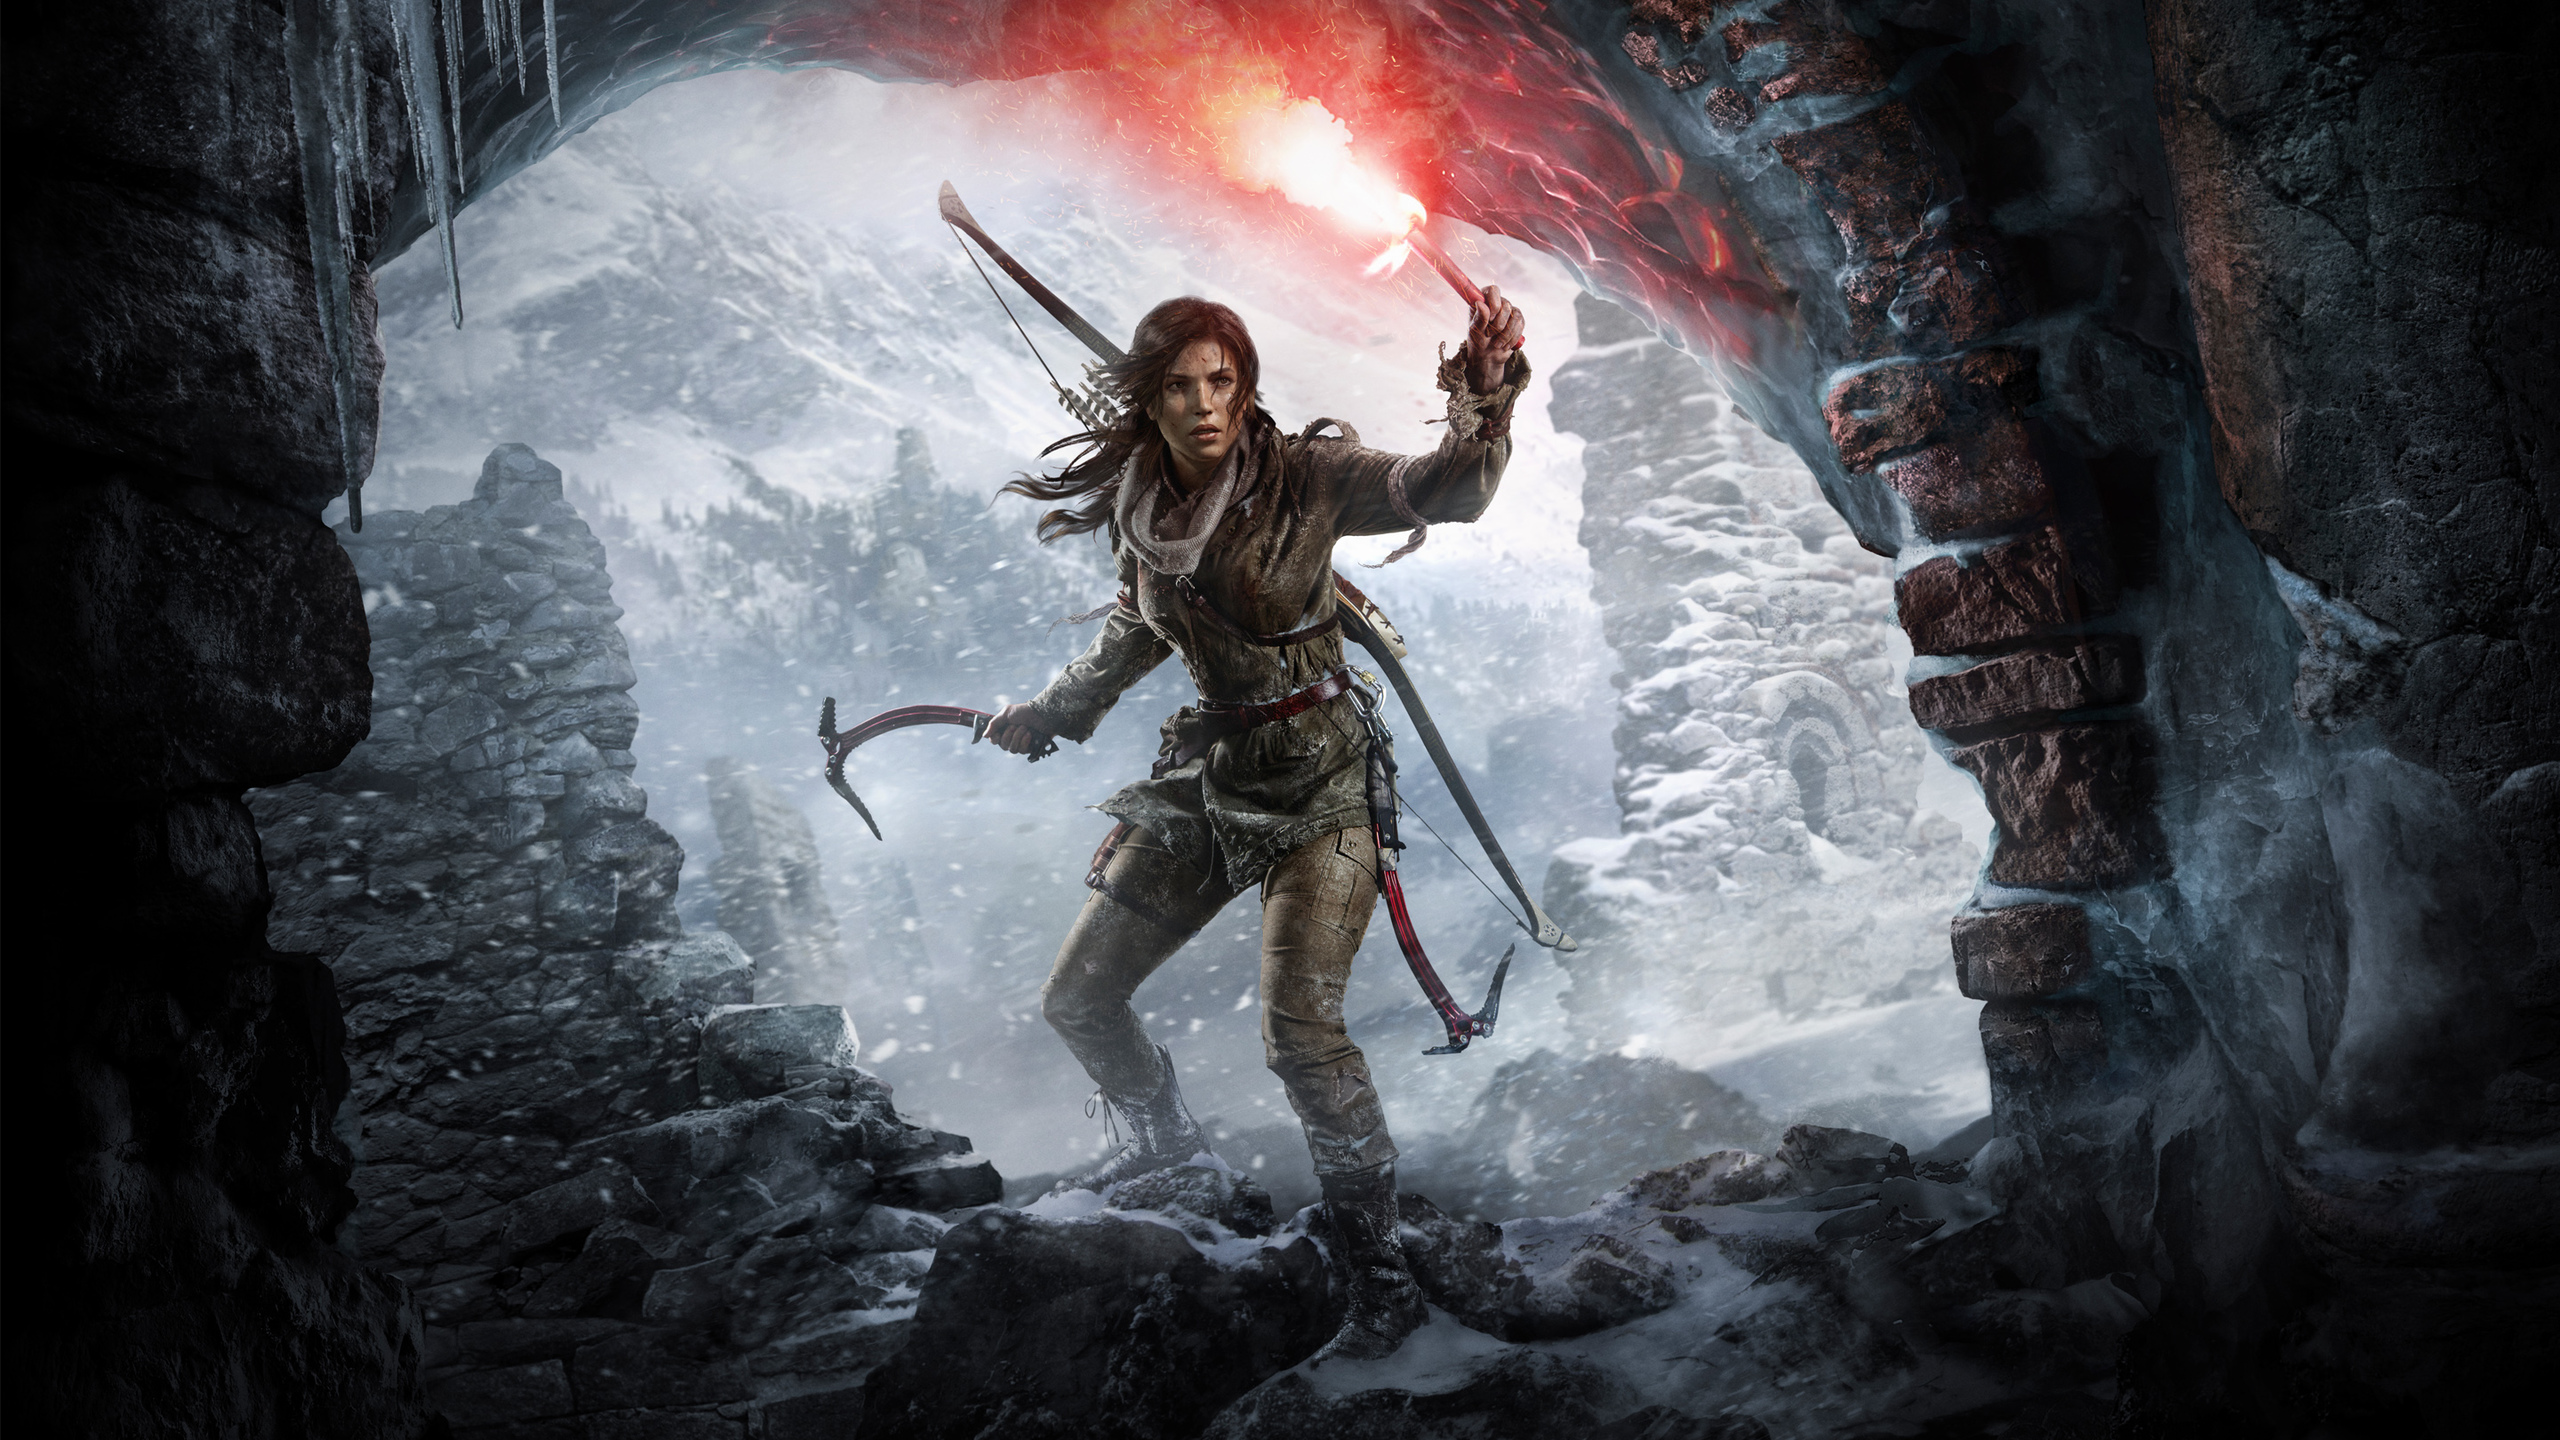 Rise of the Tomb Raider - Review